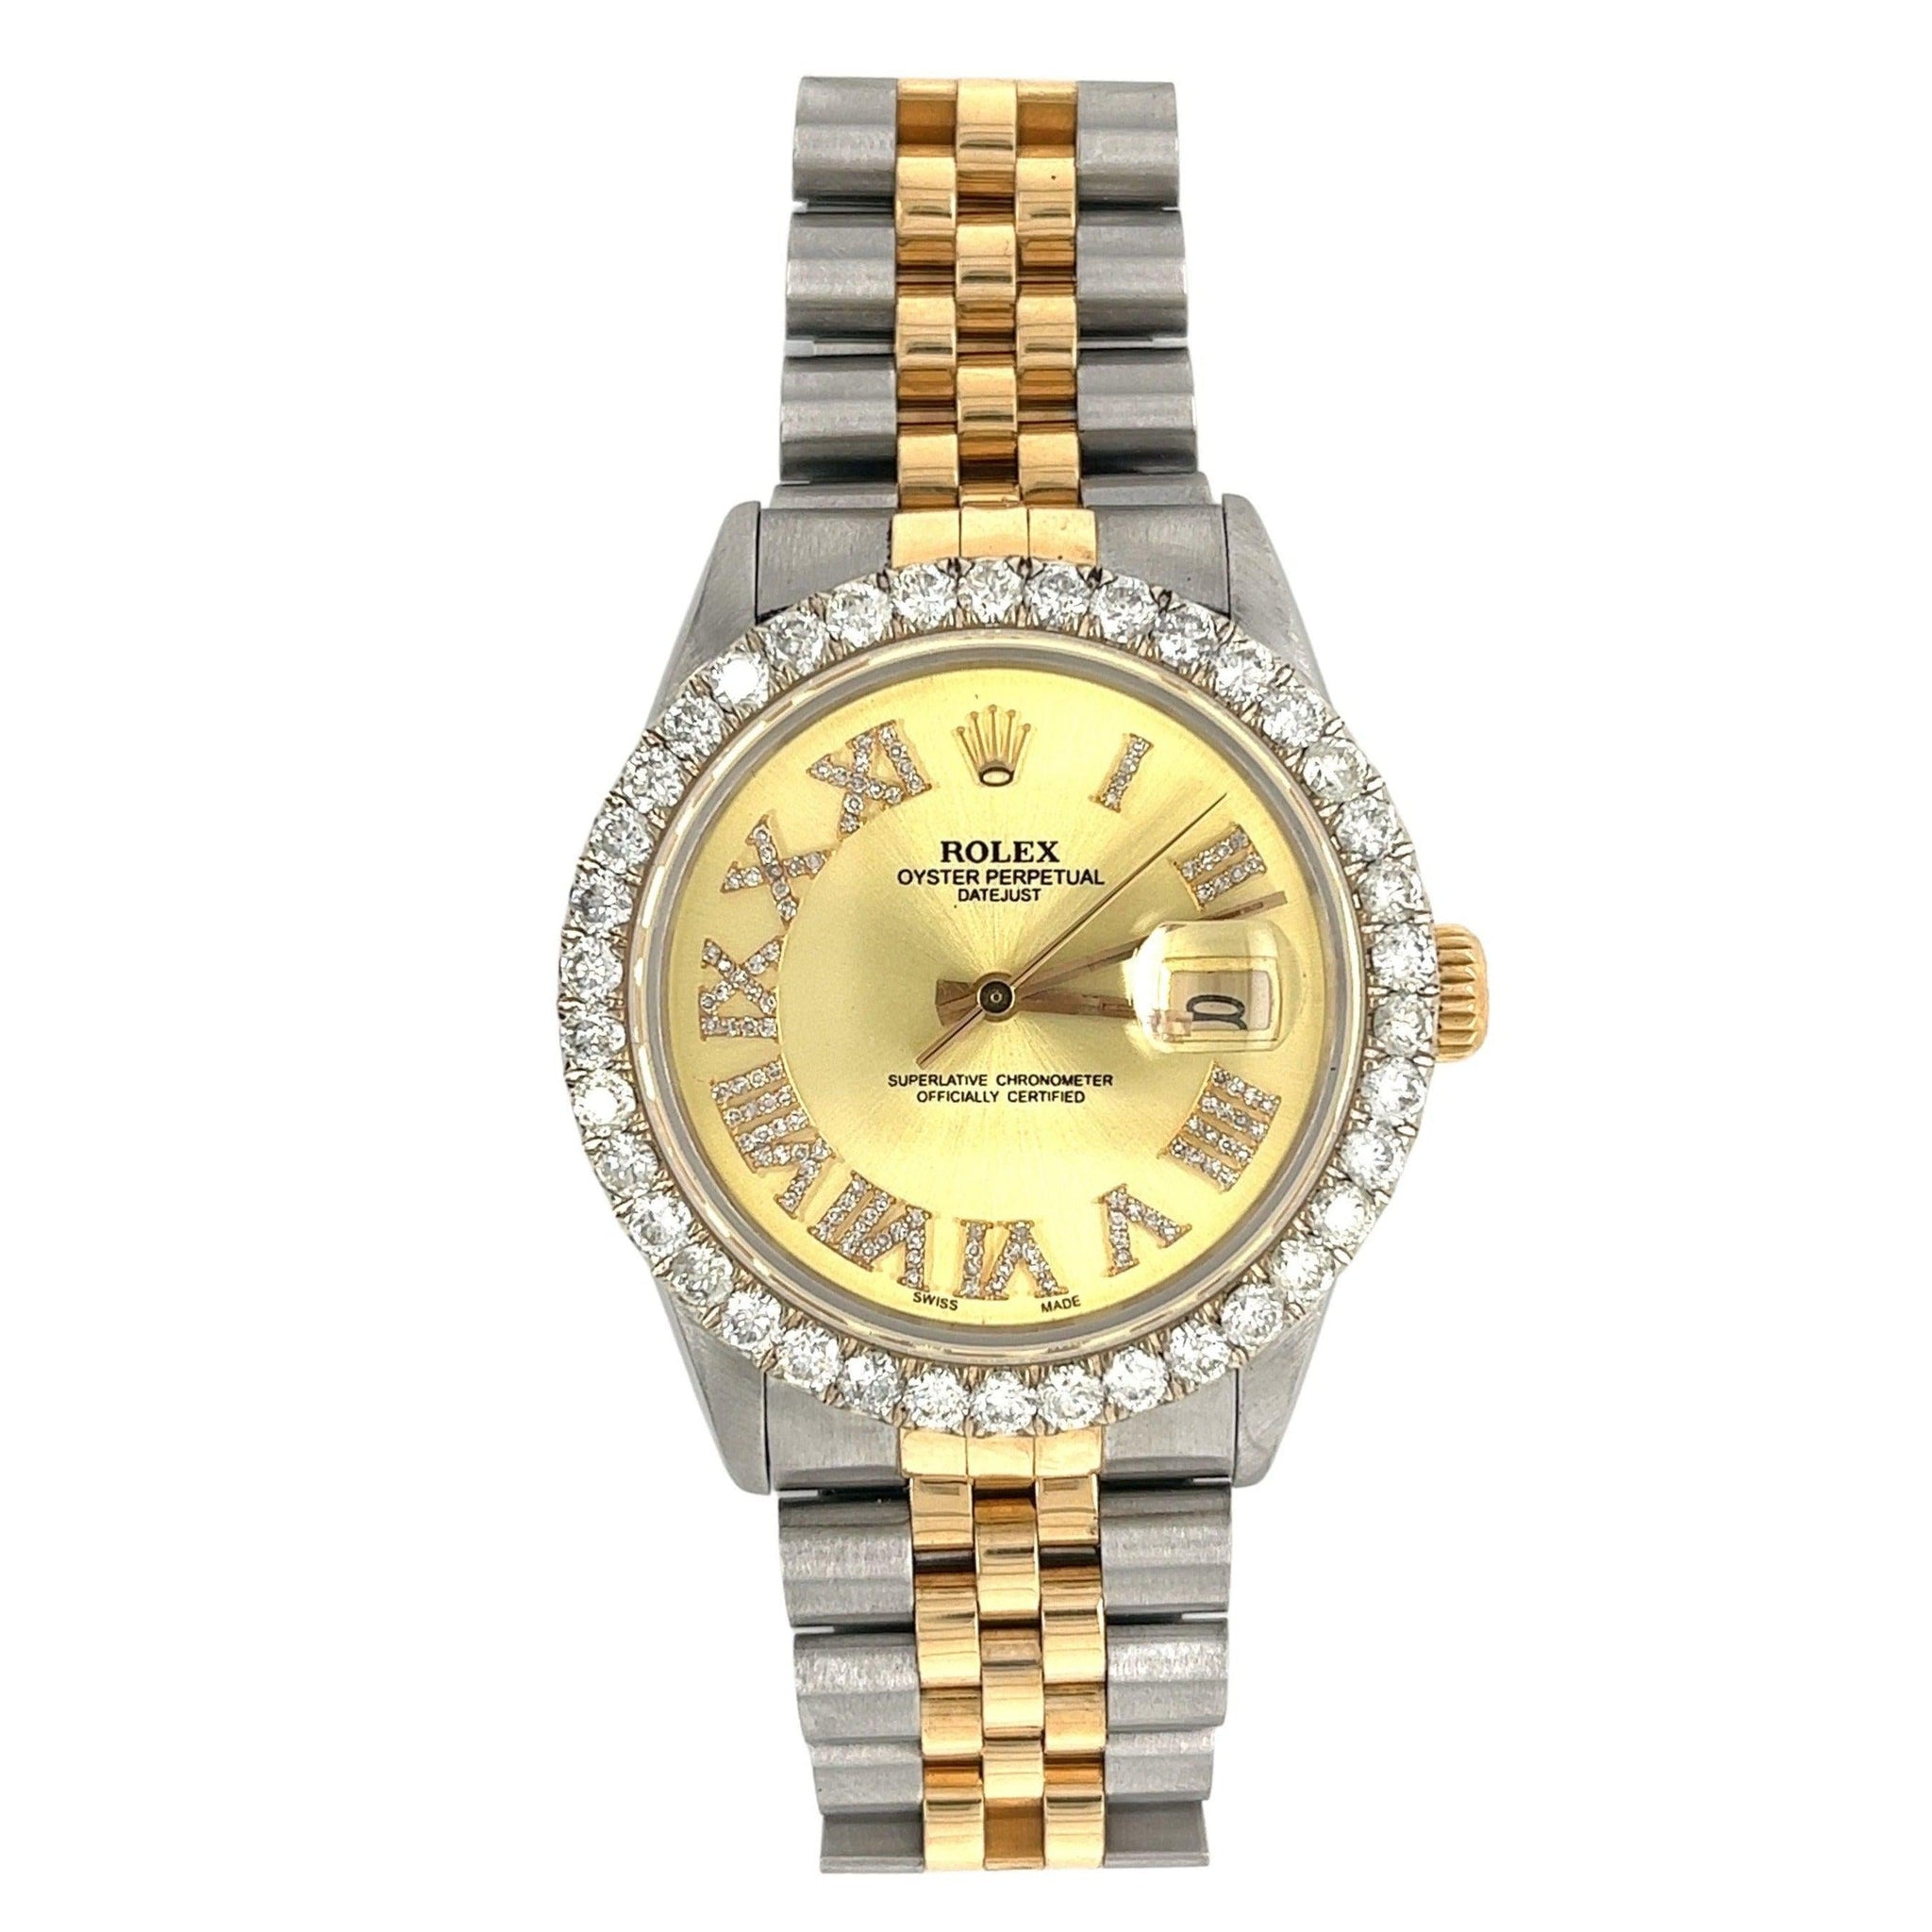 Rolex DateJust 16013 | 3 Carat Diamond Bezel and Roman Numeral Hour Marker with 36mm Dial-Watches-ASSAY